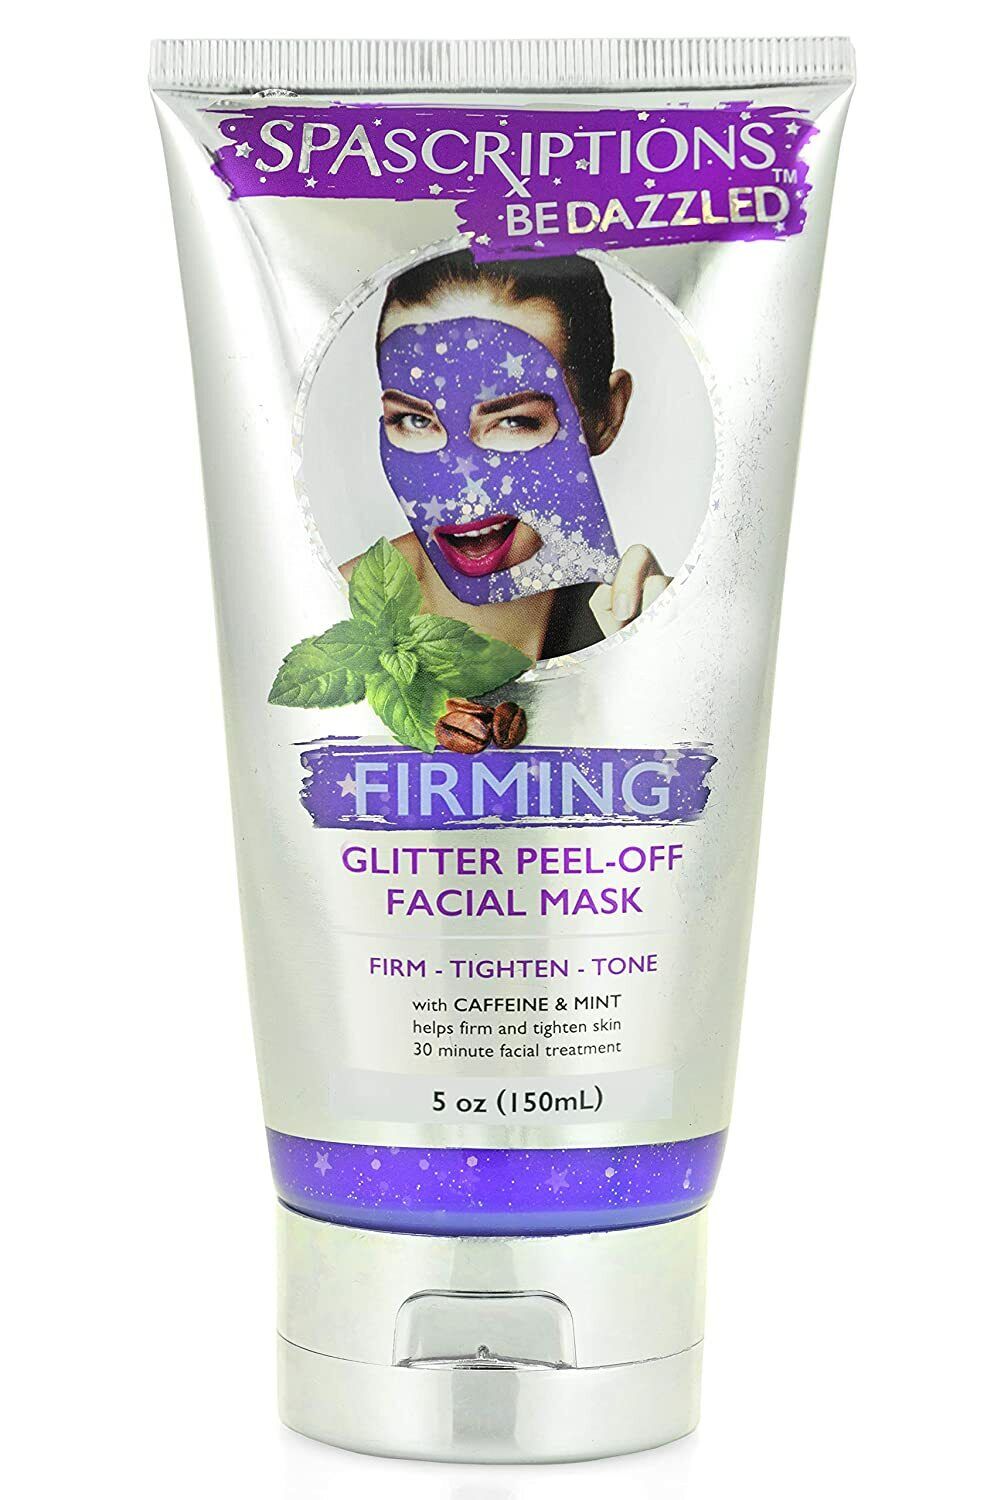 Bedazzled- Firming Glitter Peel-off Mask